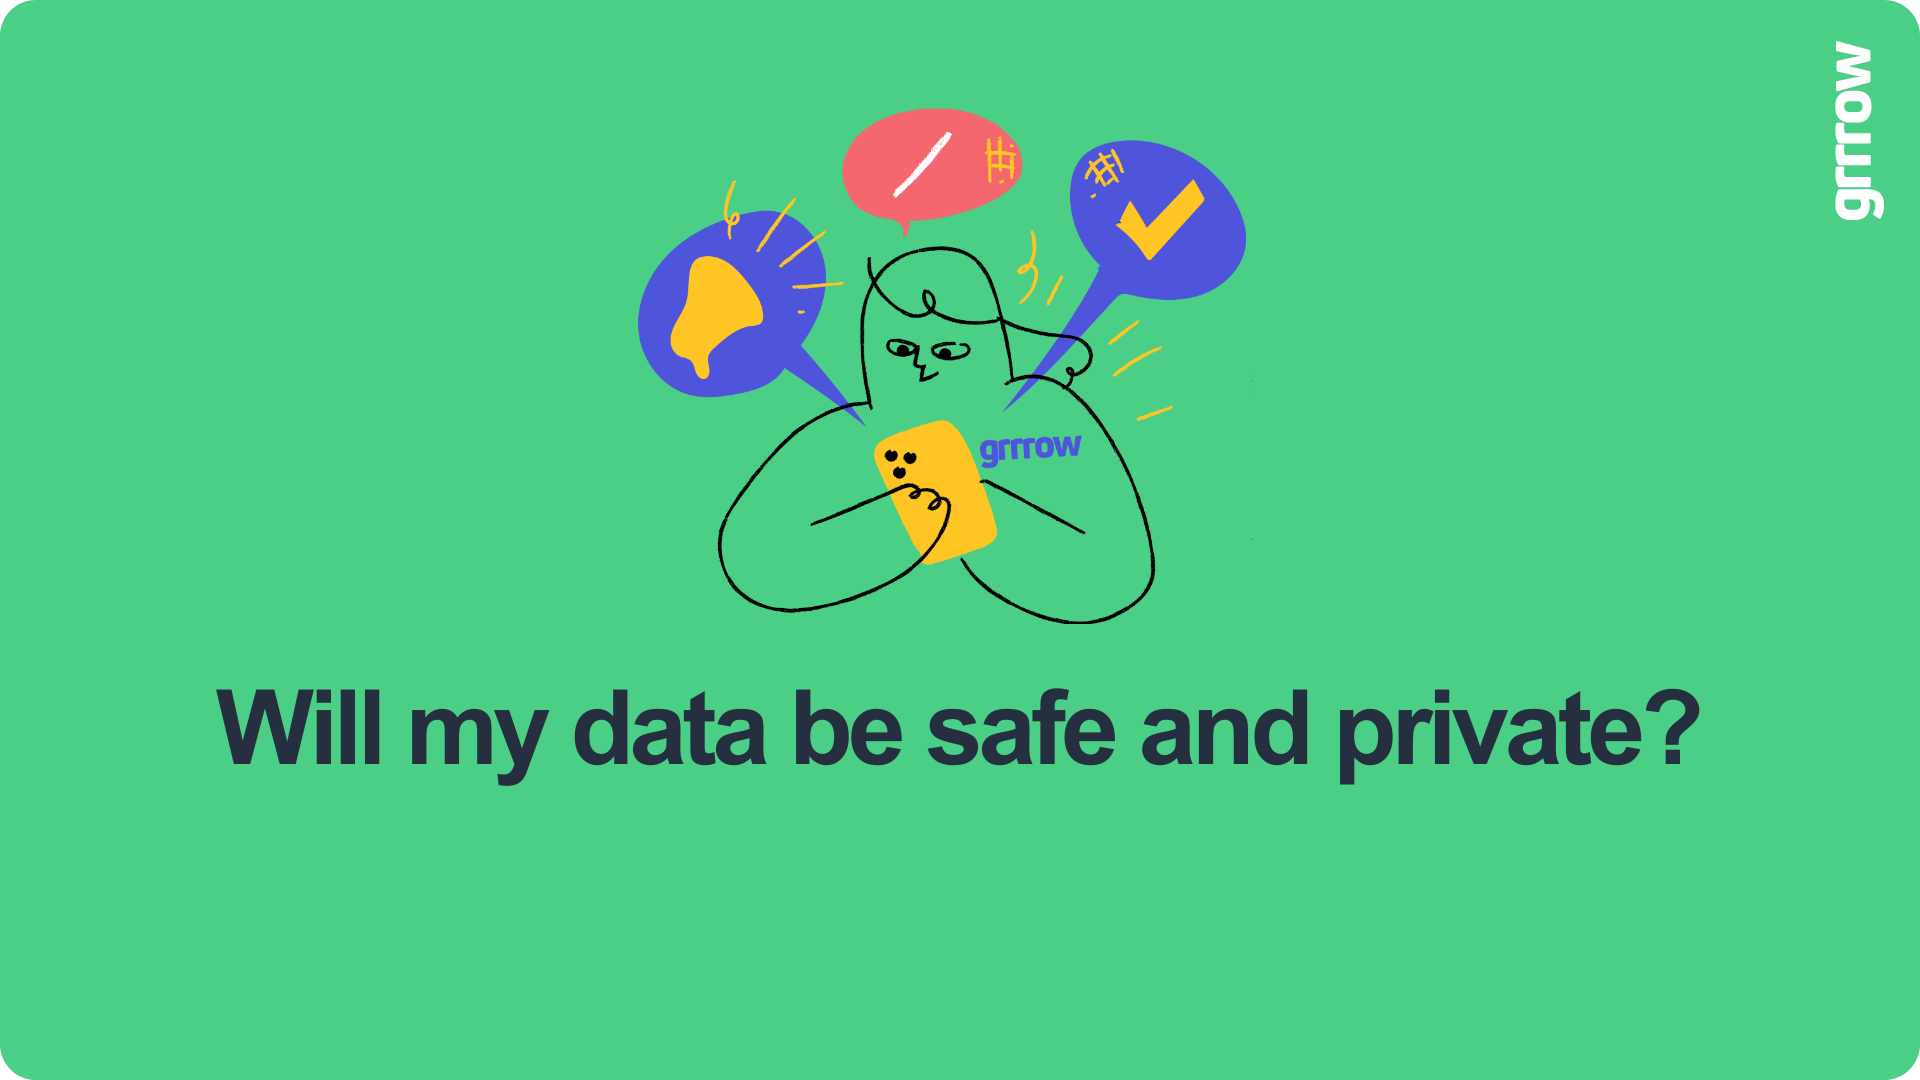 Will my data be safe and private?